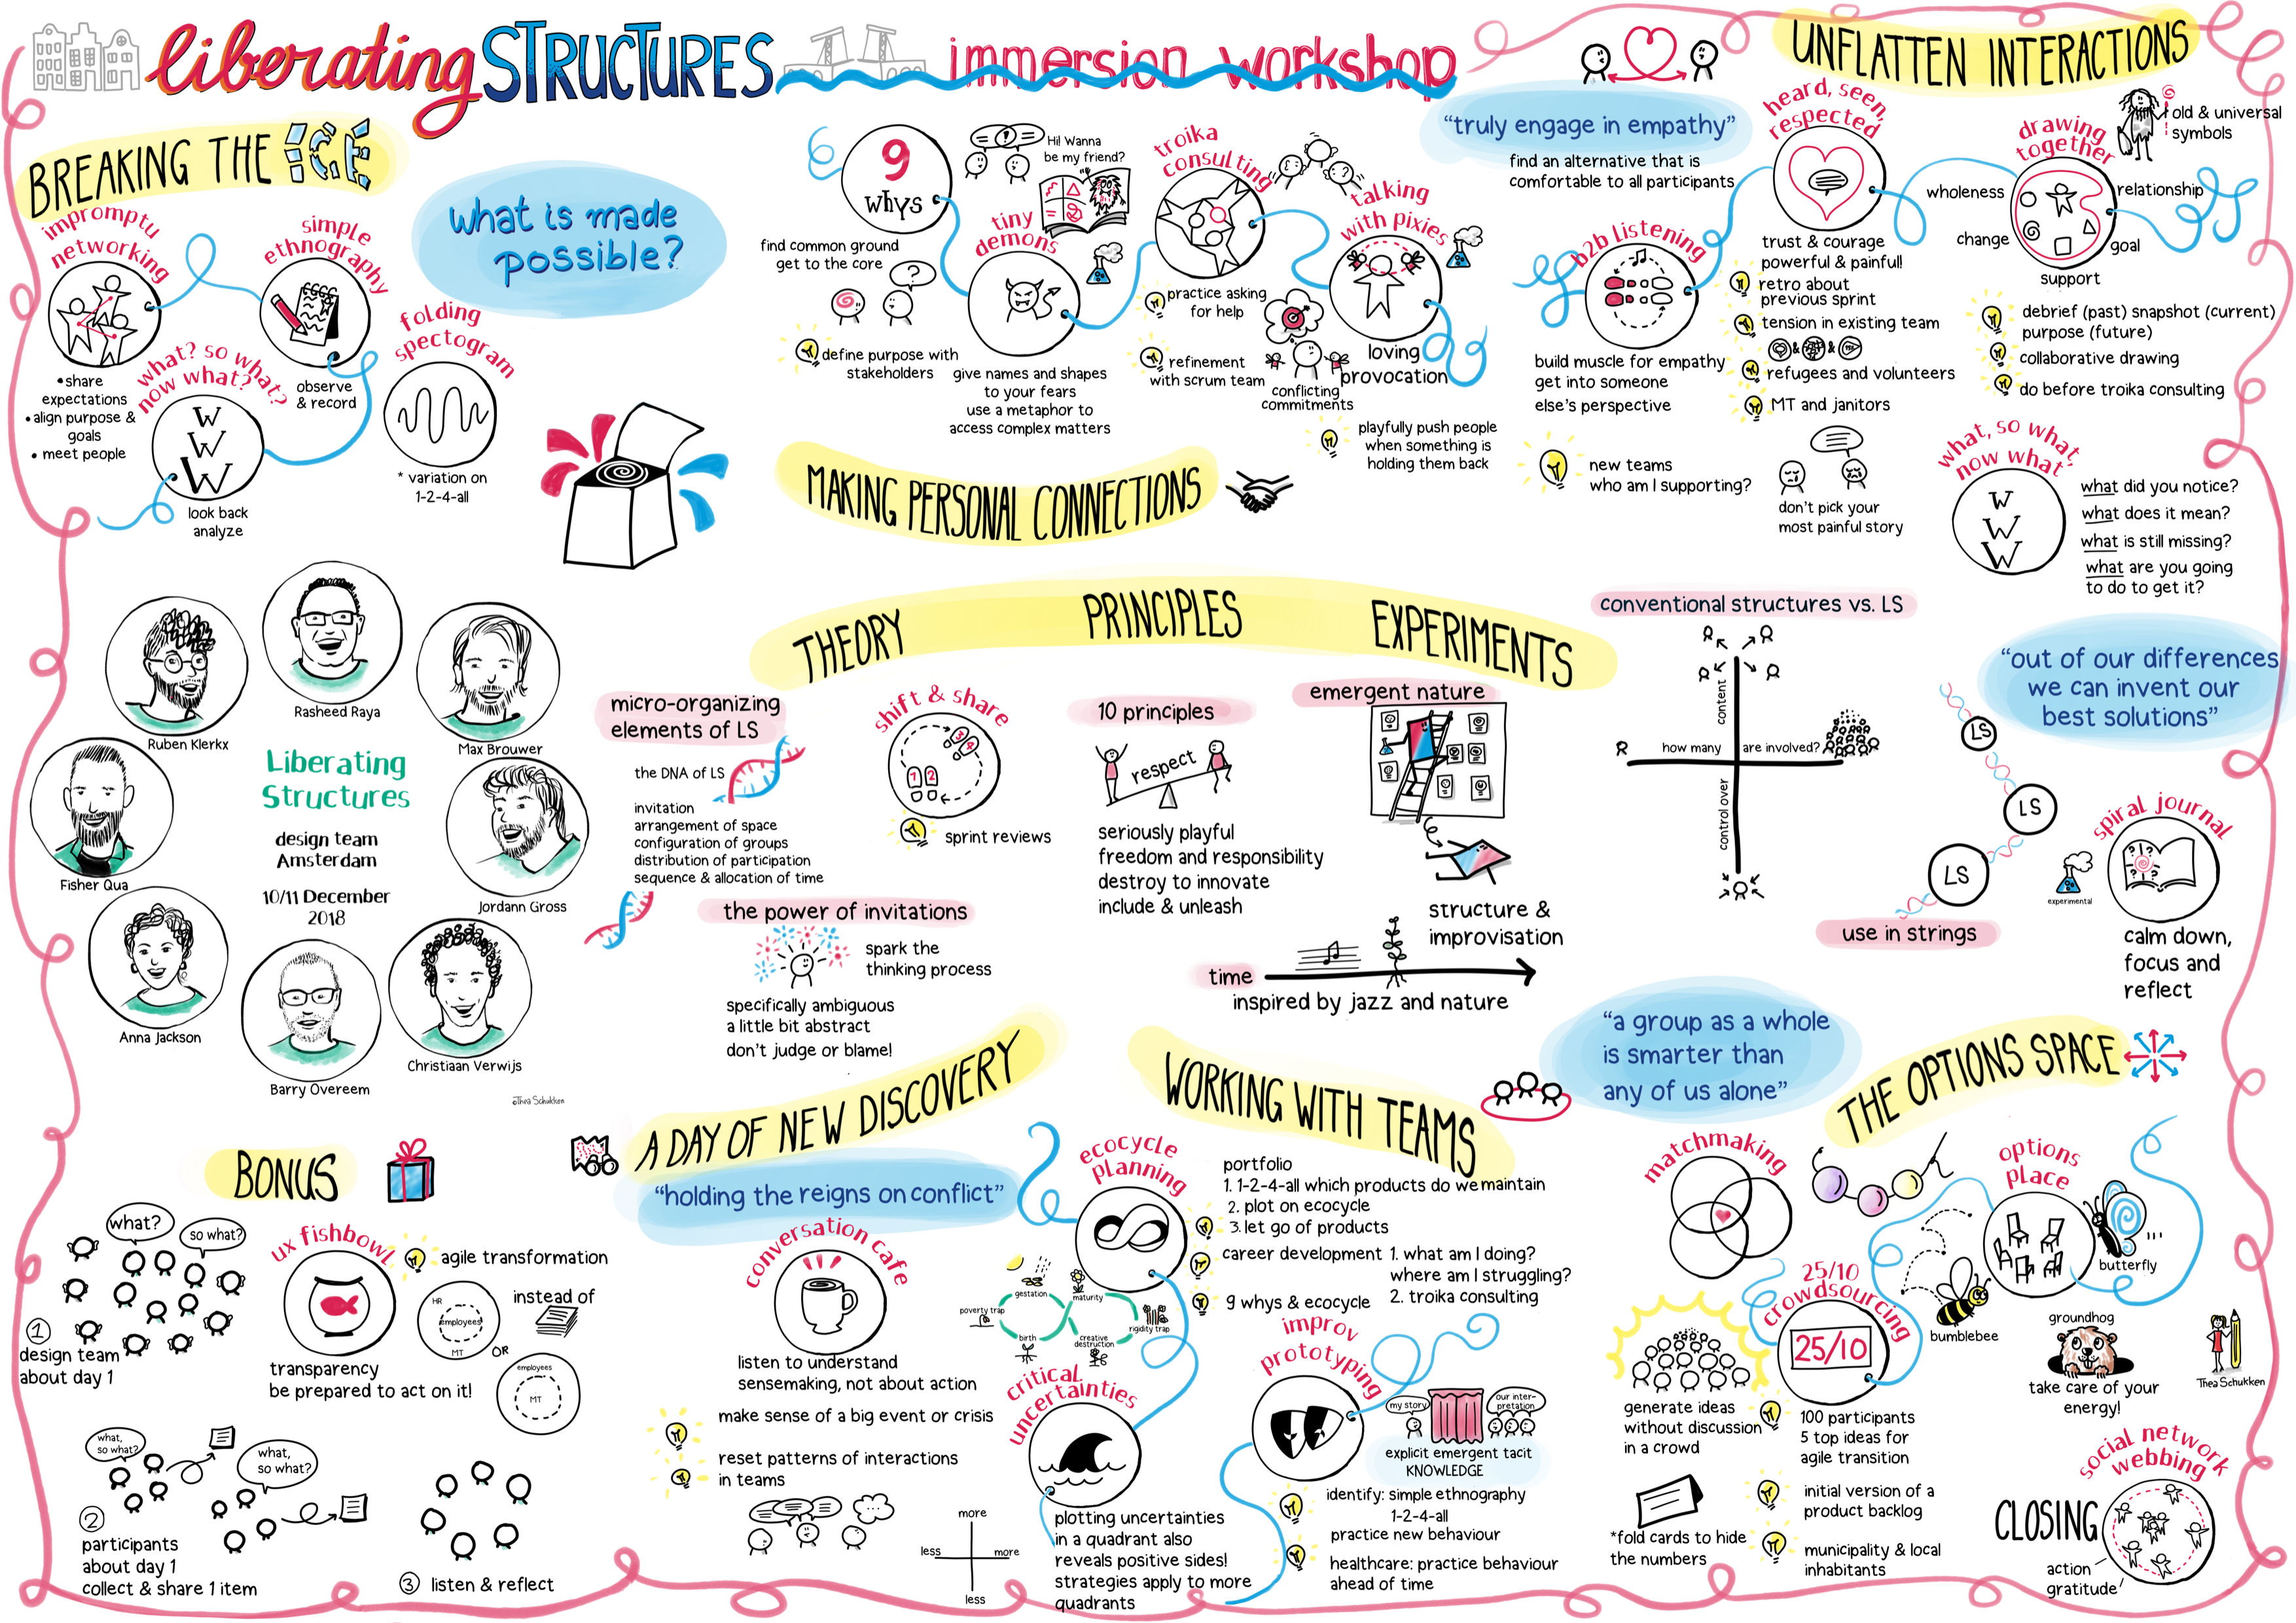 Thea Schukken's awesome visual of the immersion workshop